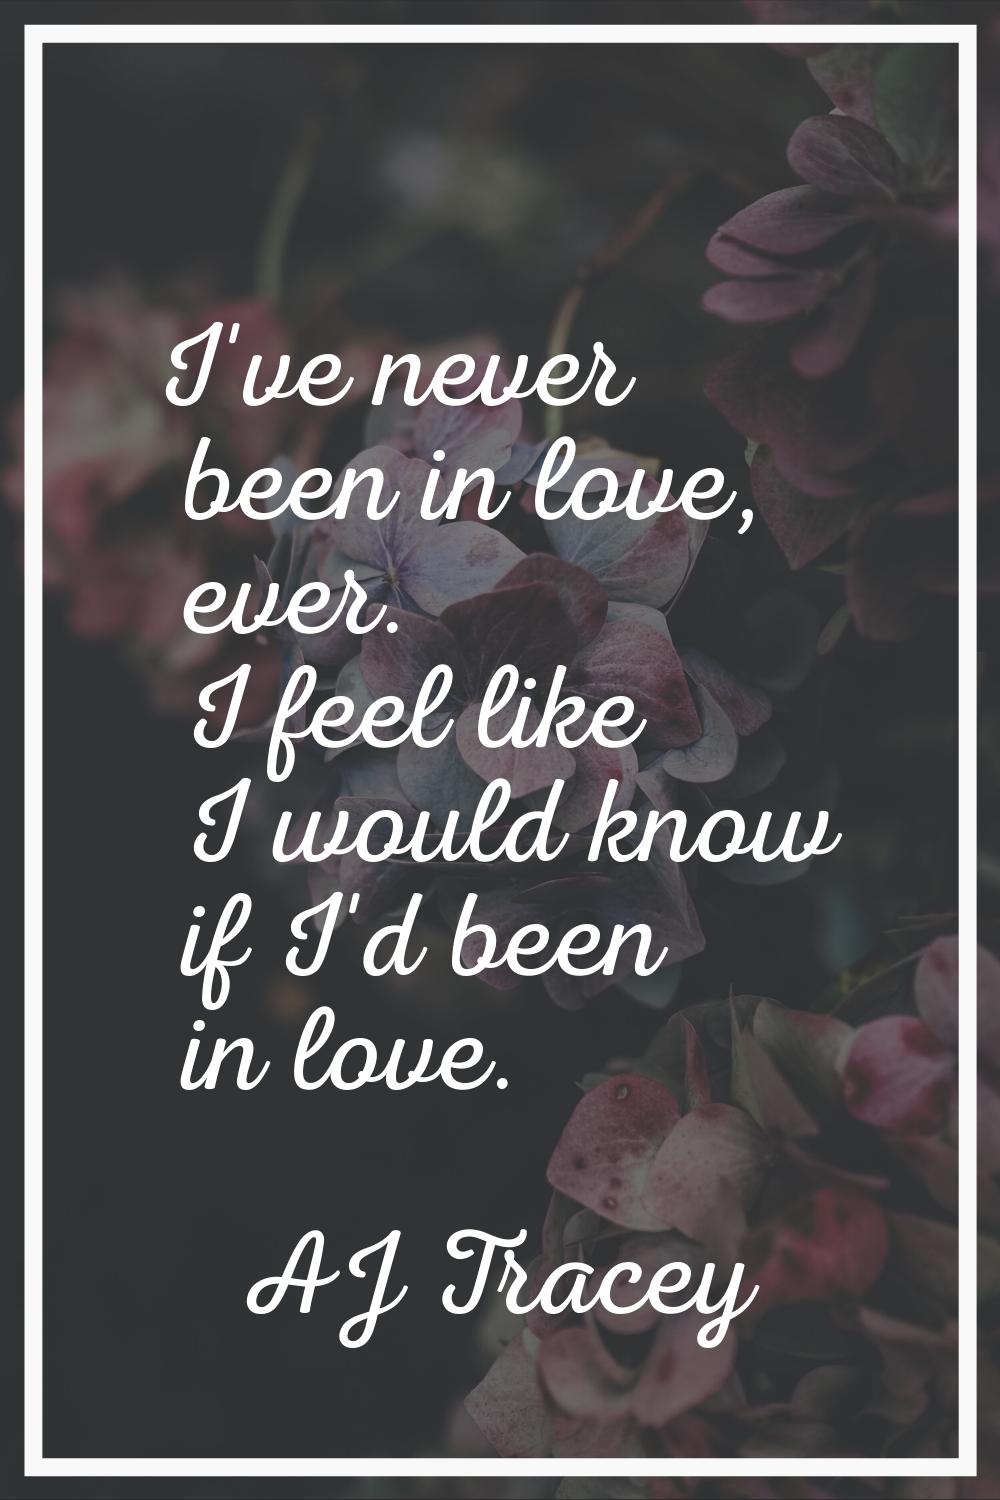 I've never been in love, ever. I feel like I would know if I'd been in love.